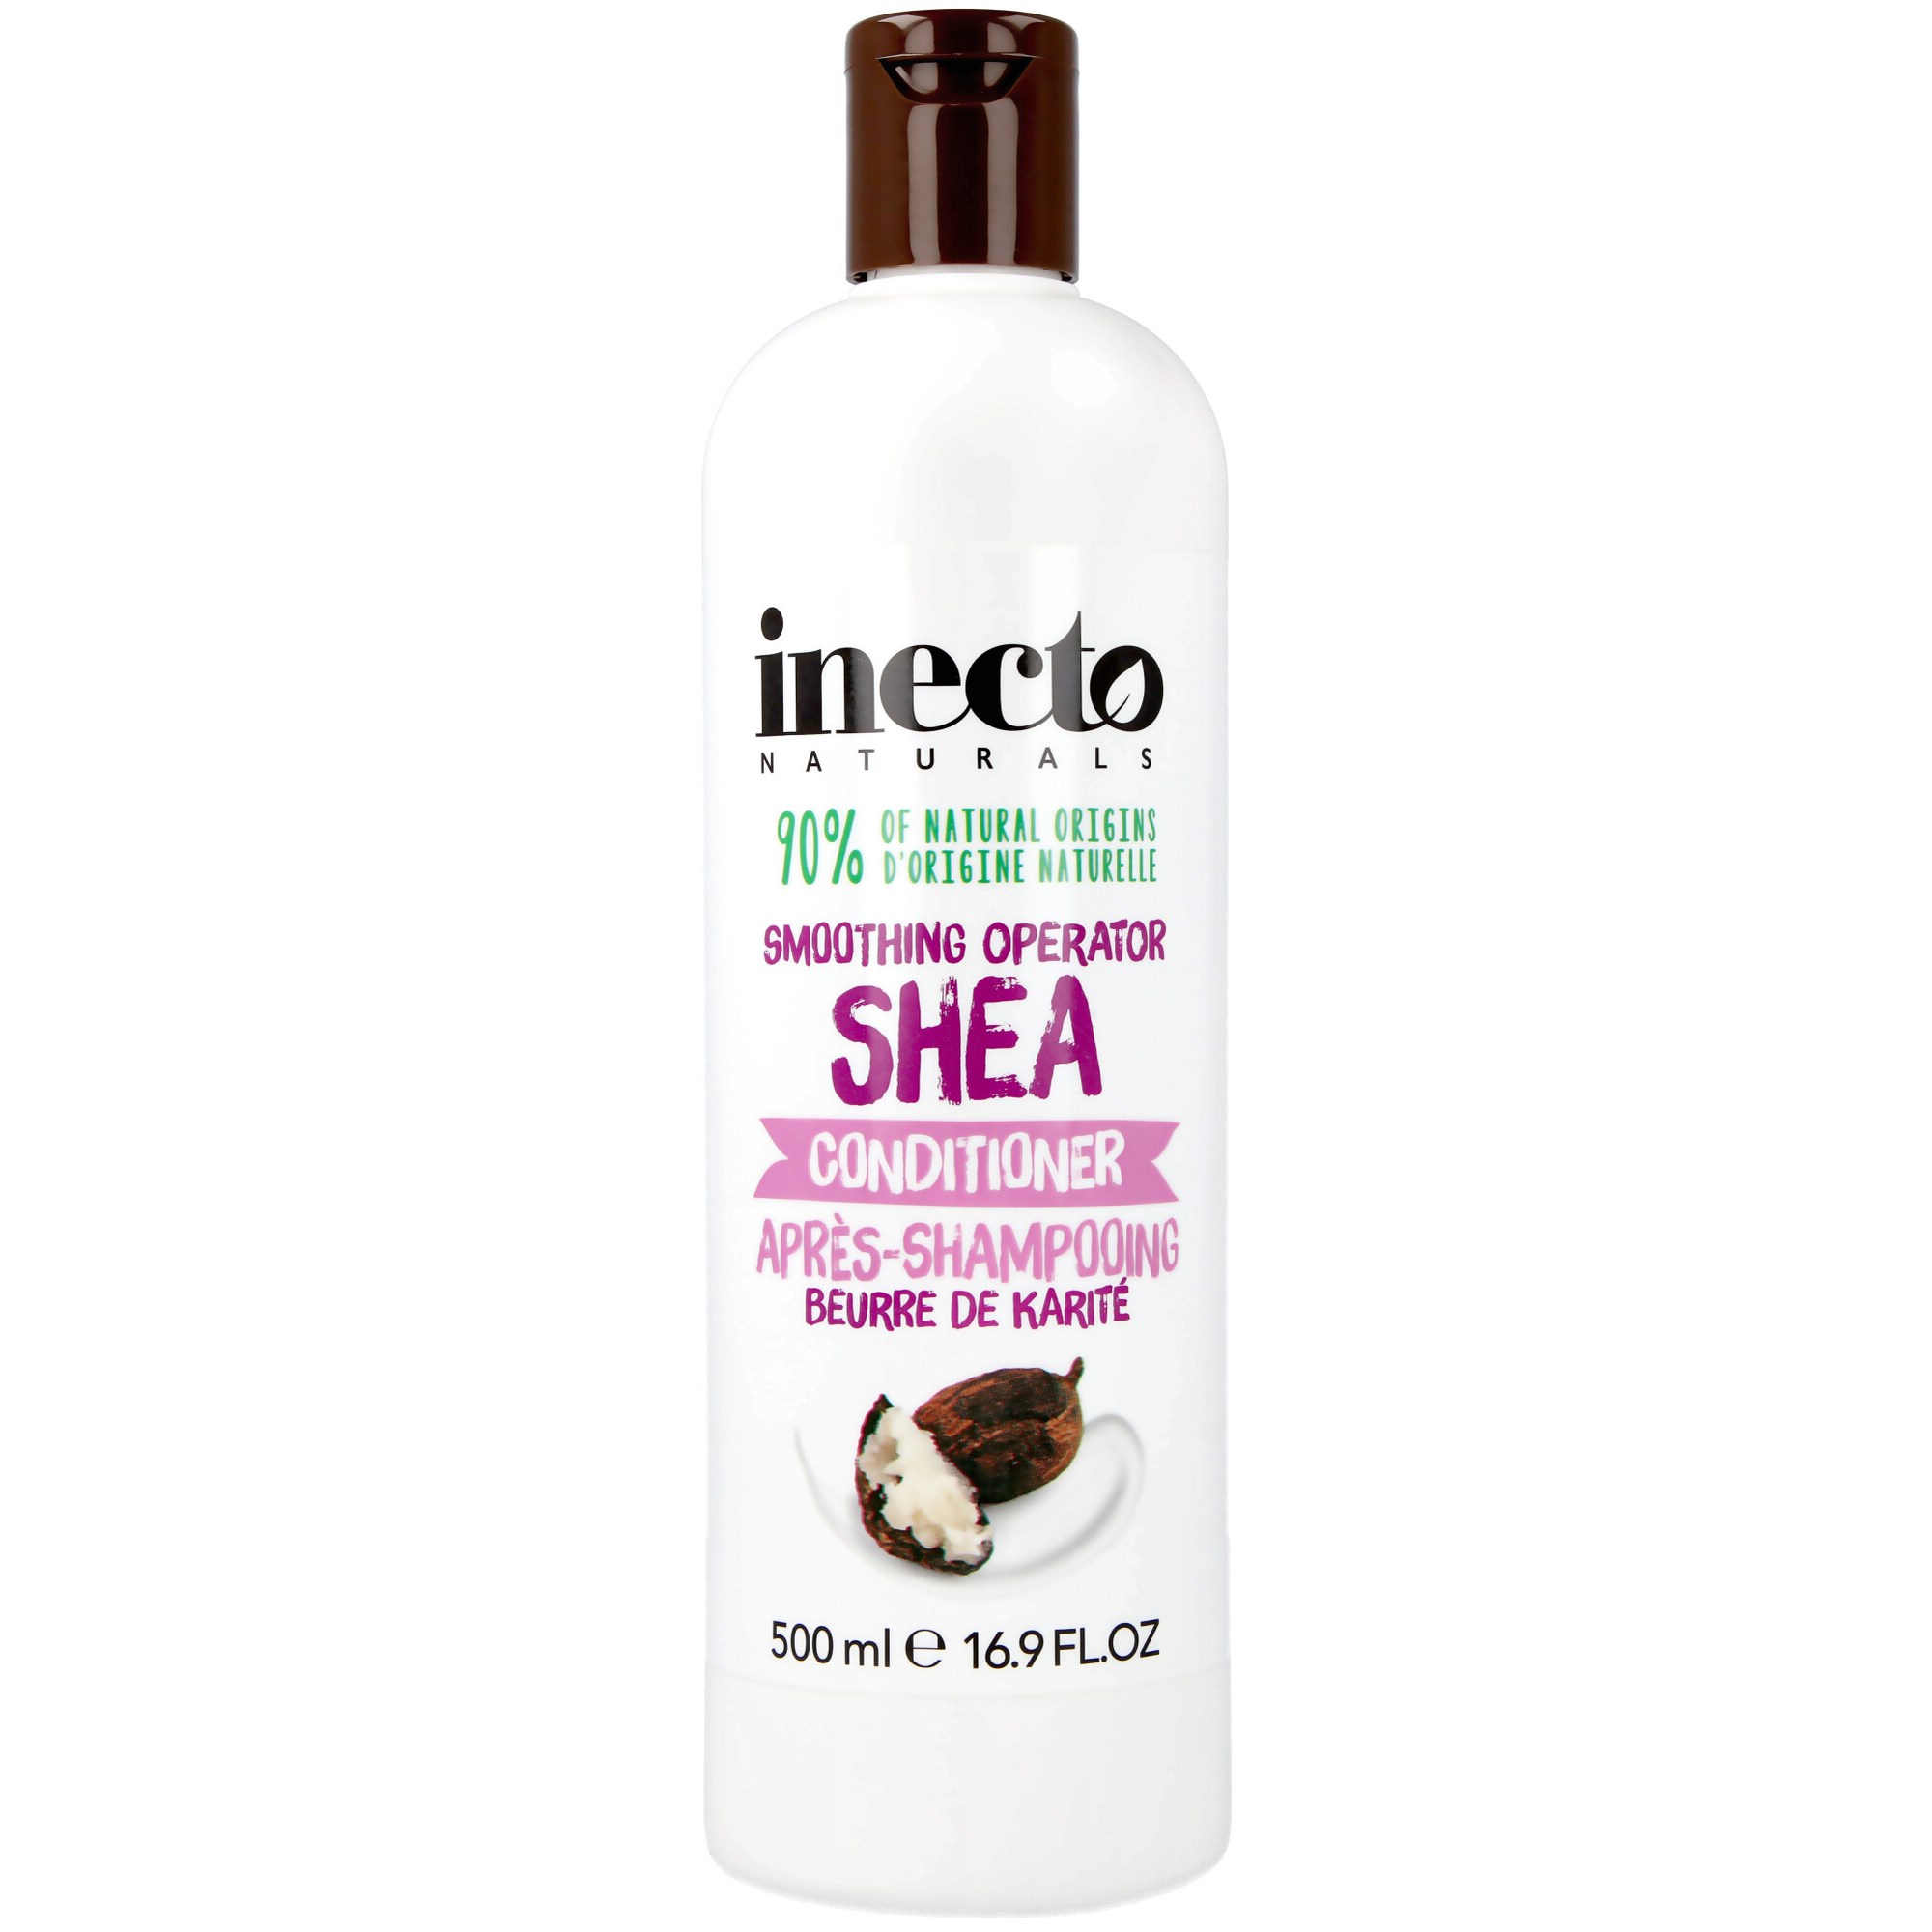 Inecto Naturals Smoothing operator Shea conditioner 500 ml